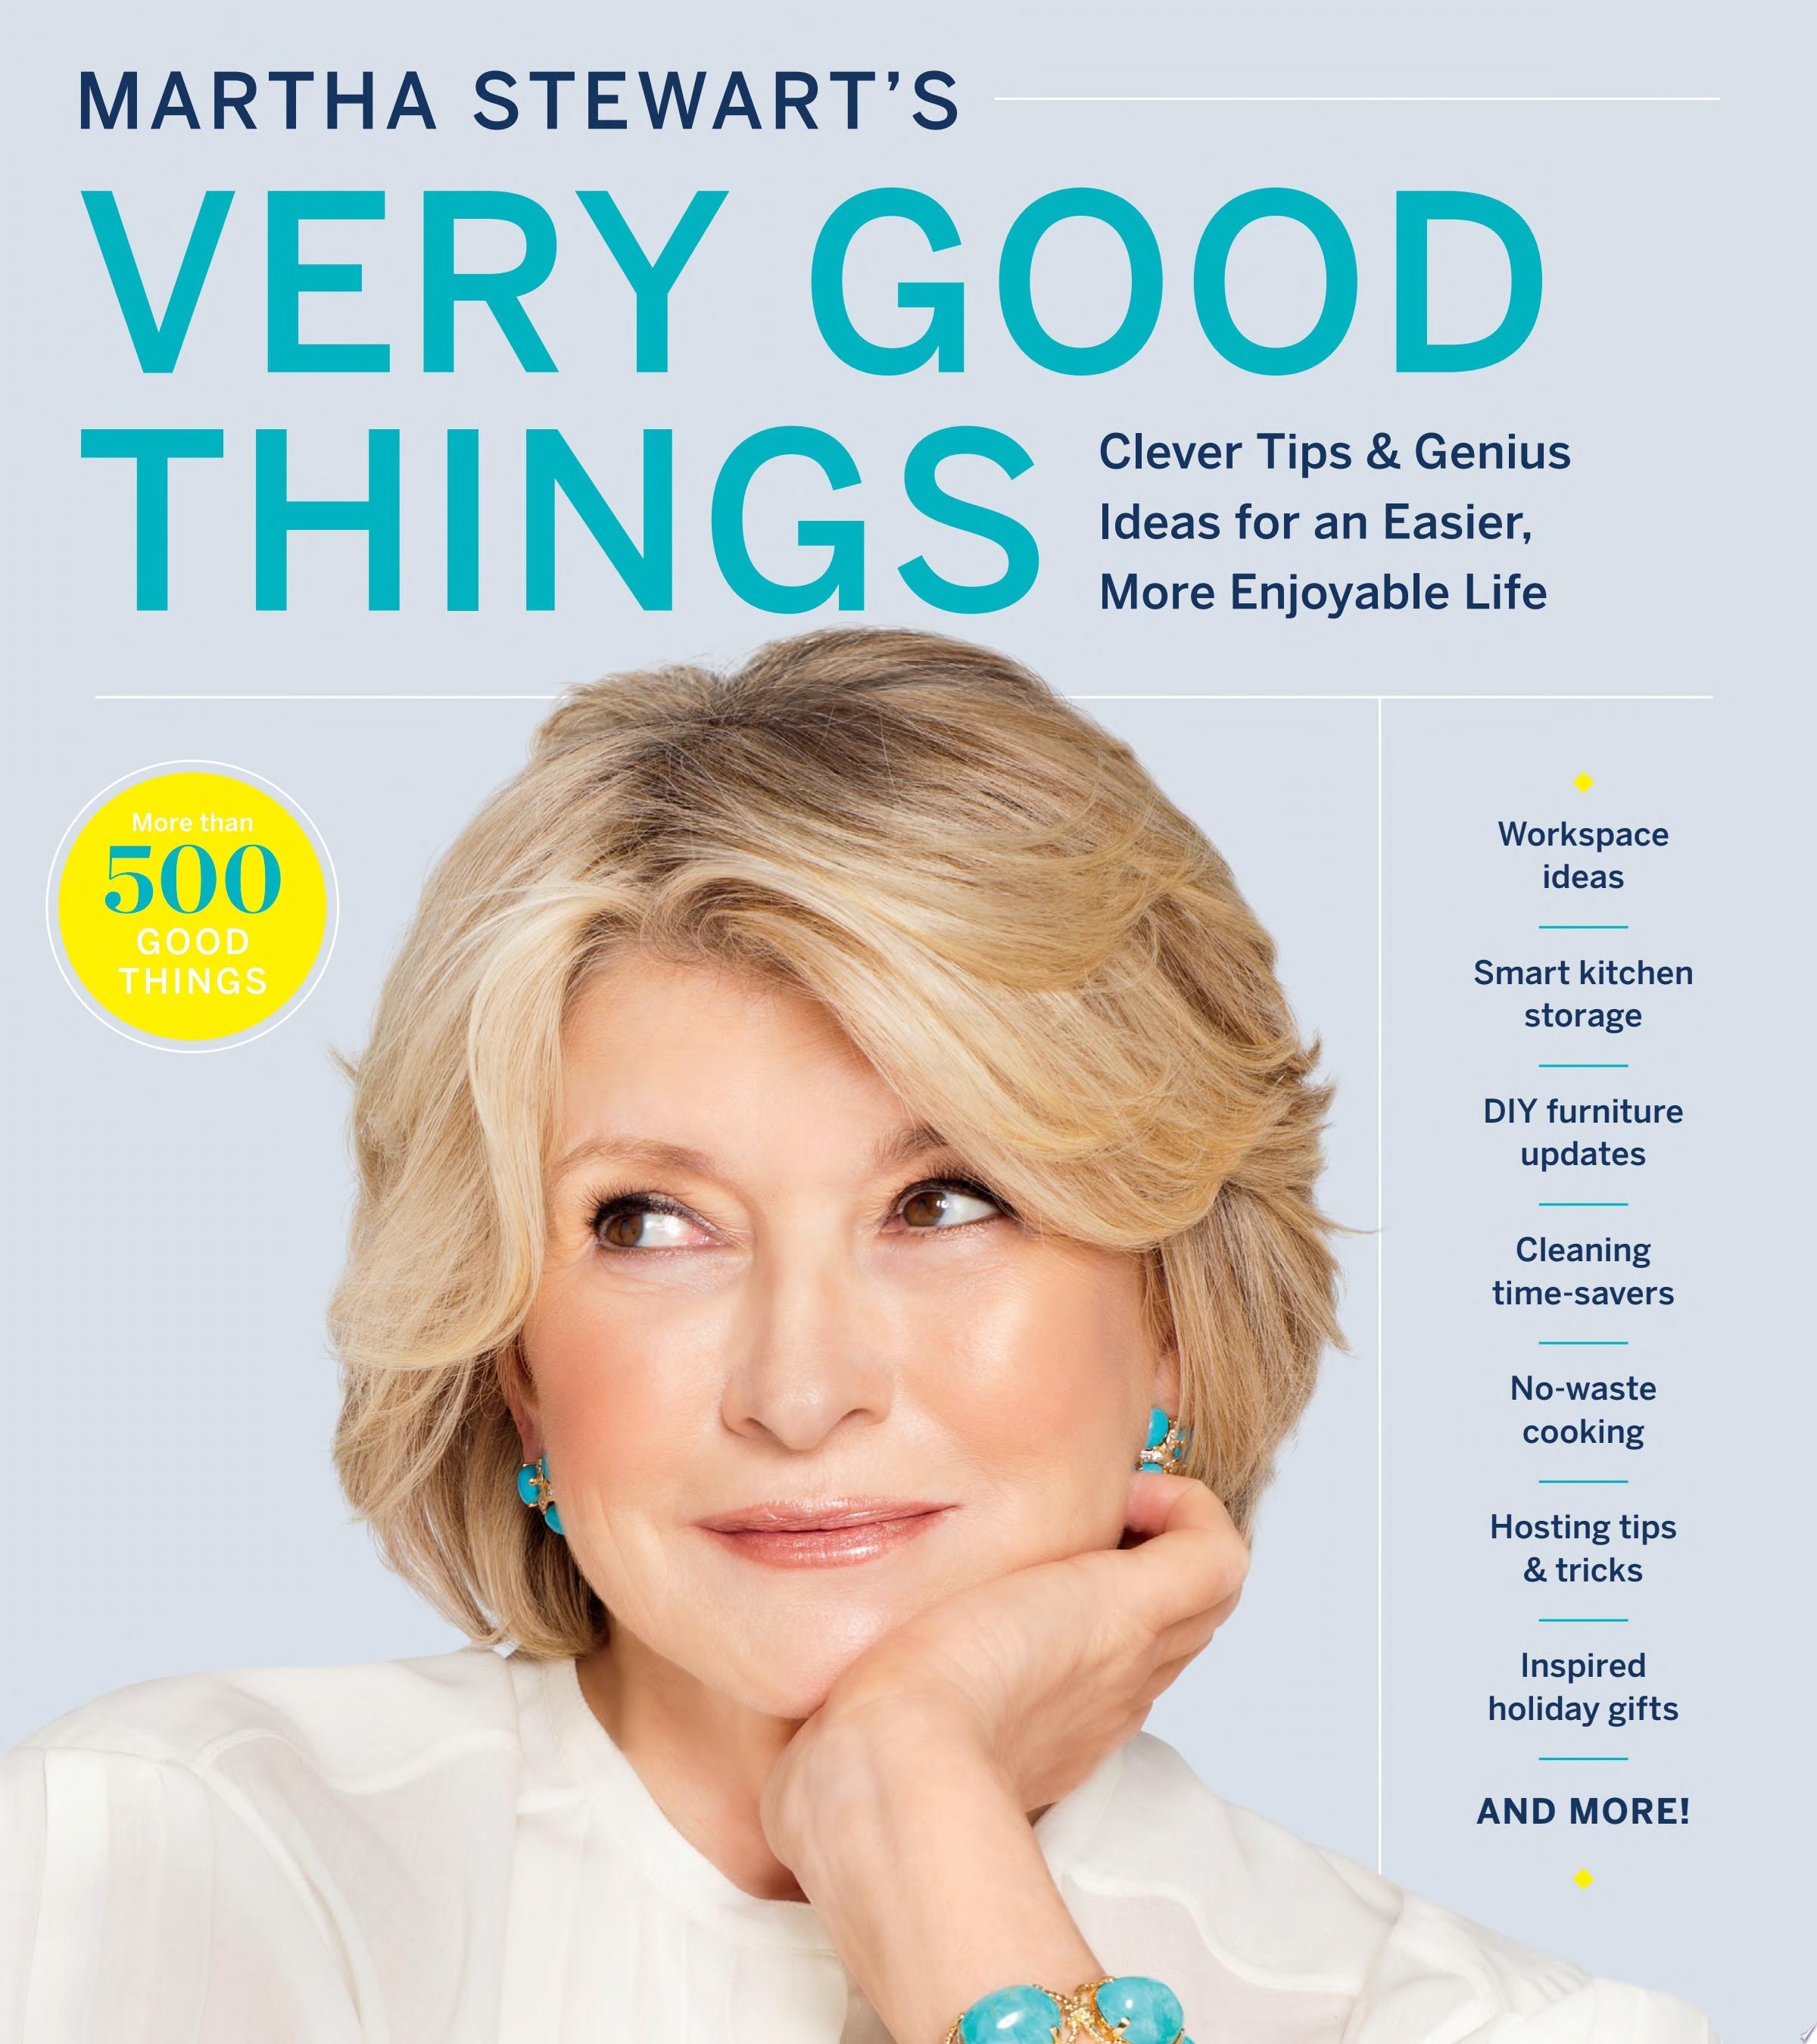 Image for "Martha Stewart&#039;s Very Good Things"